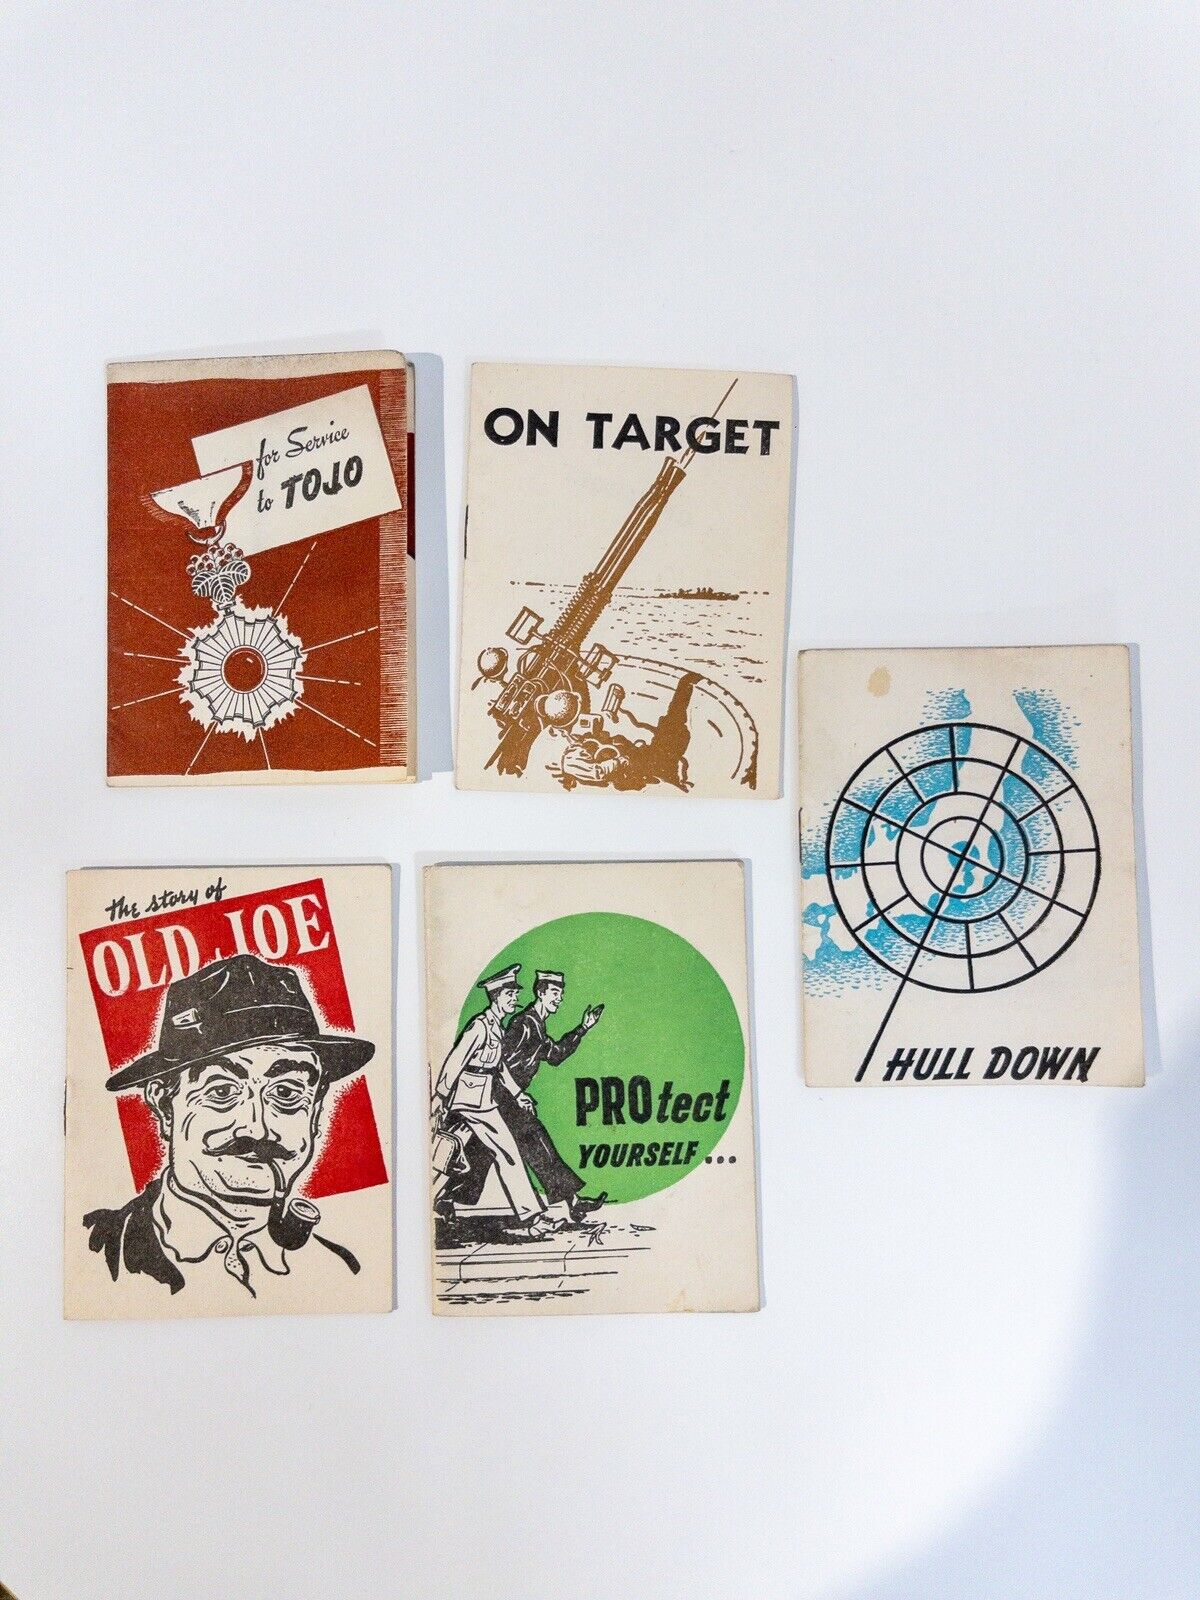 World War II Protect Yourself VD Pamphlets Lot Of 5 Story Of Old Joe